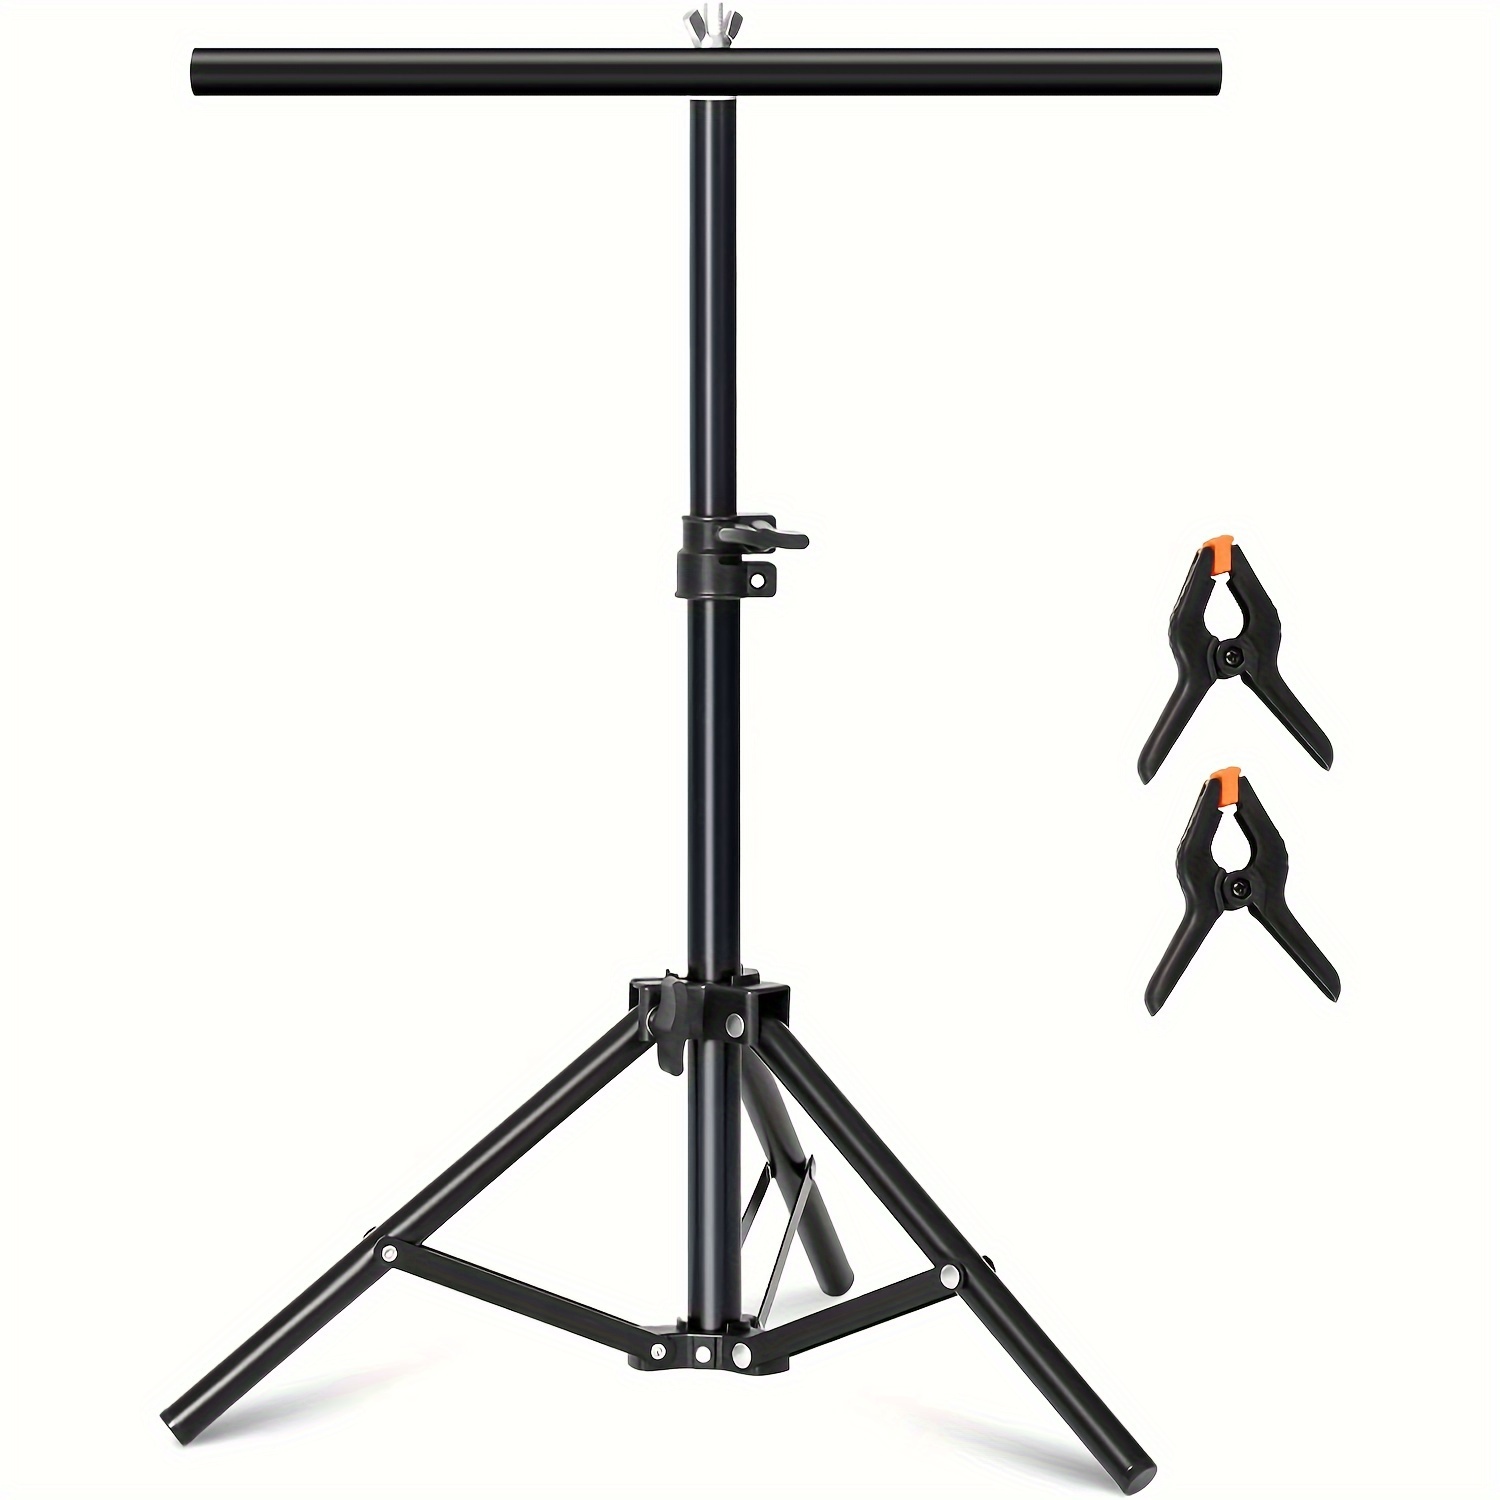 

Tabletop Photography Backdrop T-shape Stand Support Light Stands Mini Holder For Photo Studio Desktop Background Paper, T-shape Background Support Stand Crossbar With 2 Clamps